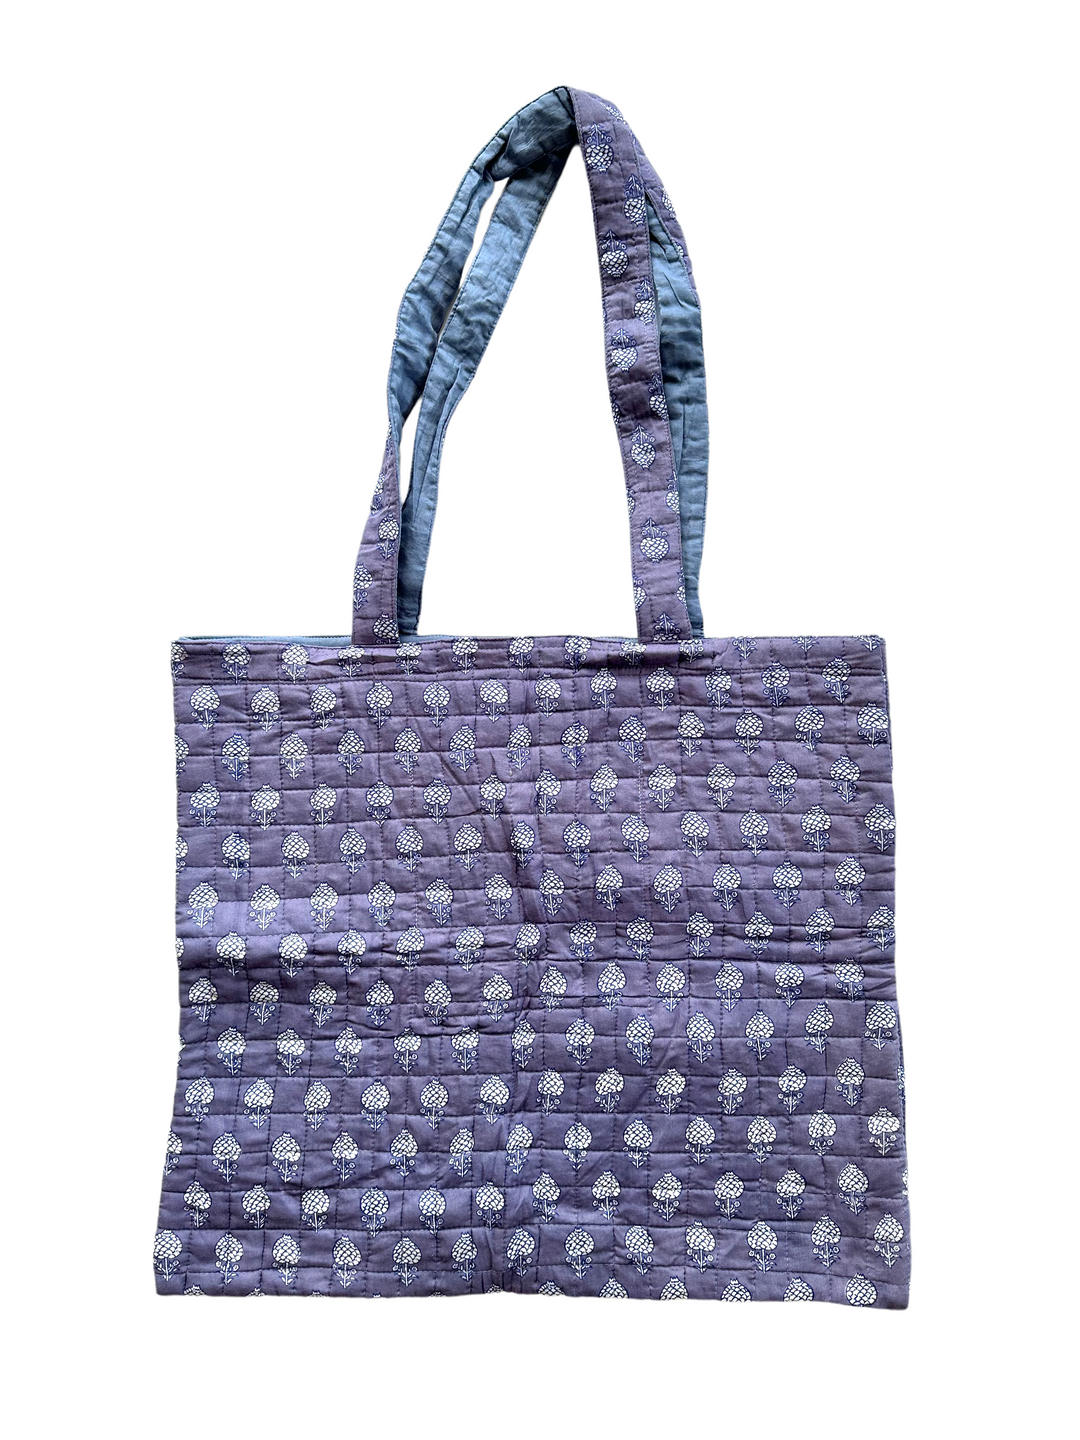 Periwinkle Day - Quilted Shopping Tote